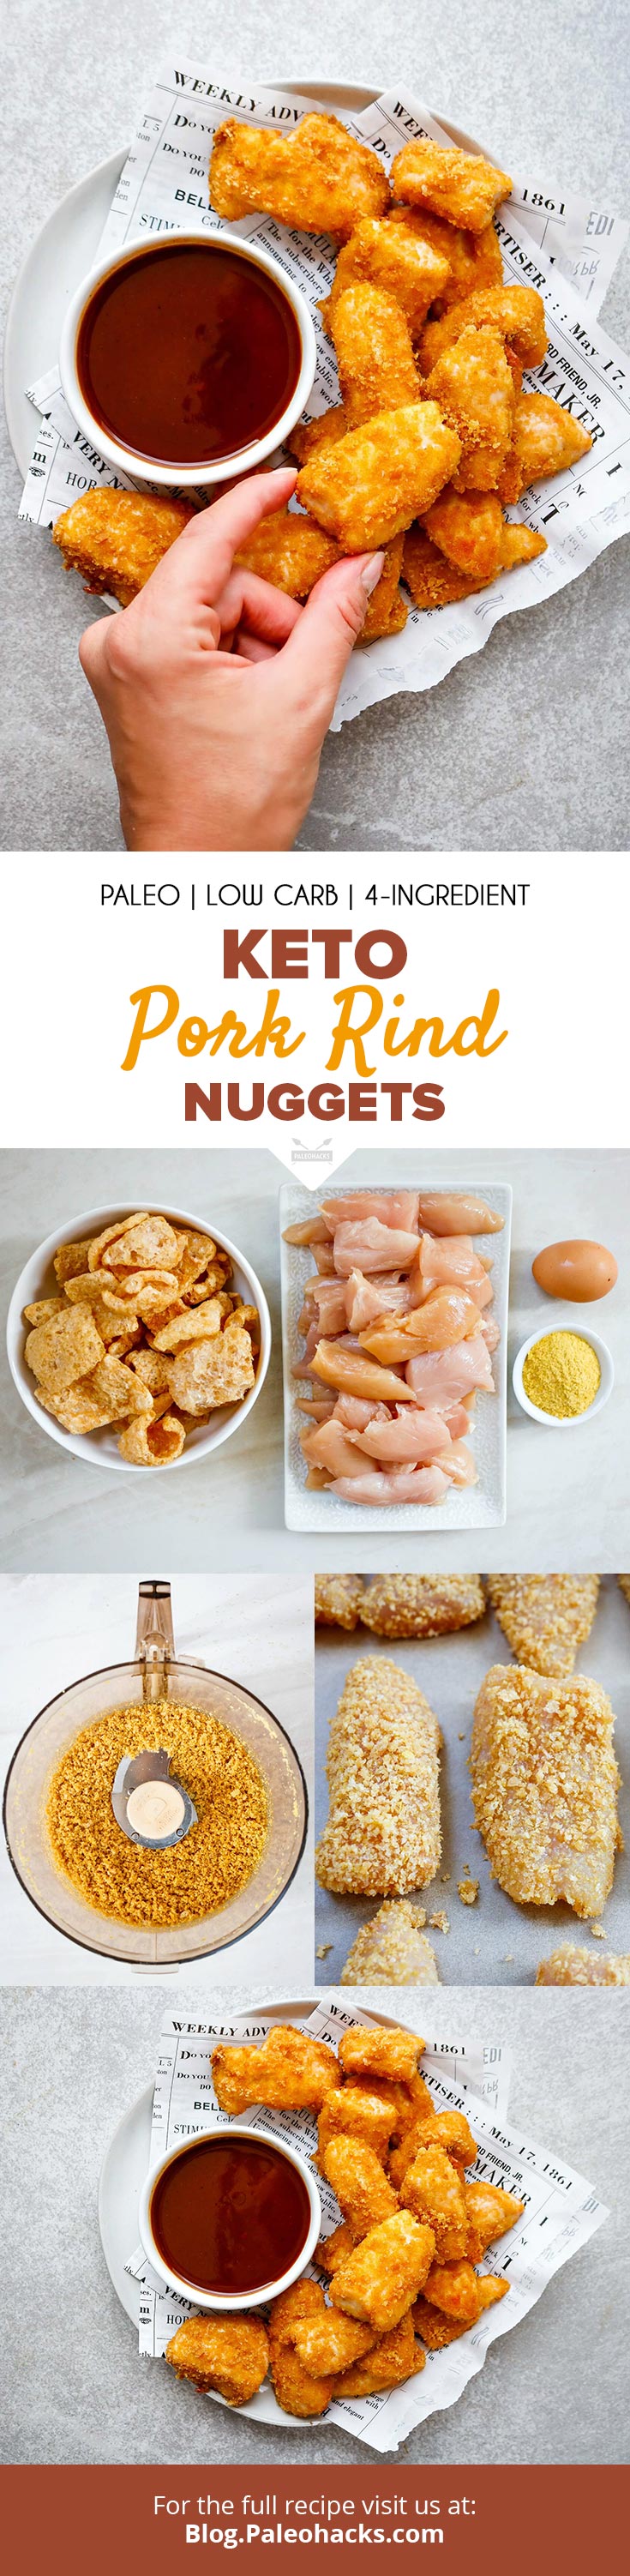 Bake up these Keto Chicken Nuggets Coated in Pork Rinds for a low-carb, gluten-free, and nut-free snack. Make as many batches as you want, we won't judge!